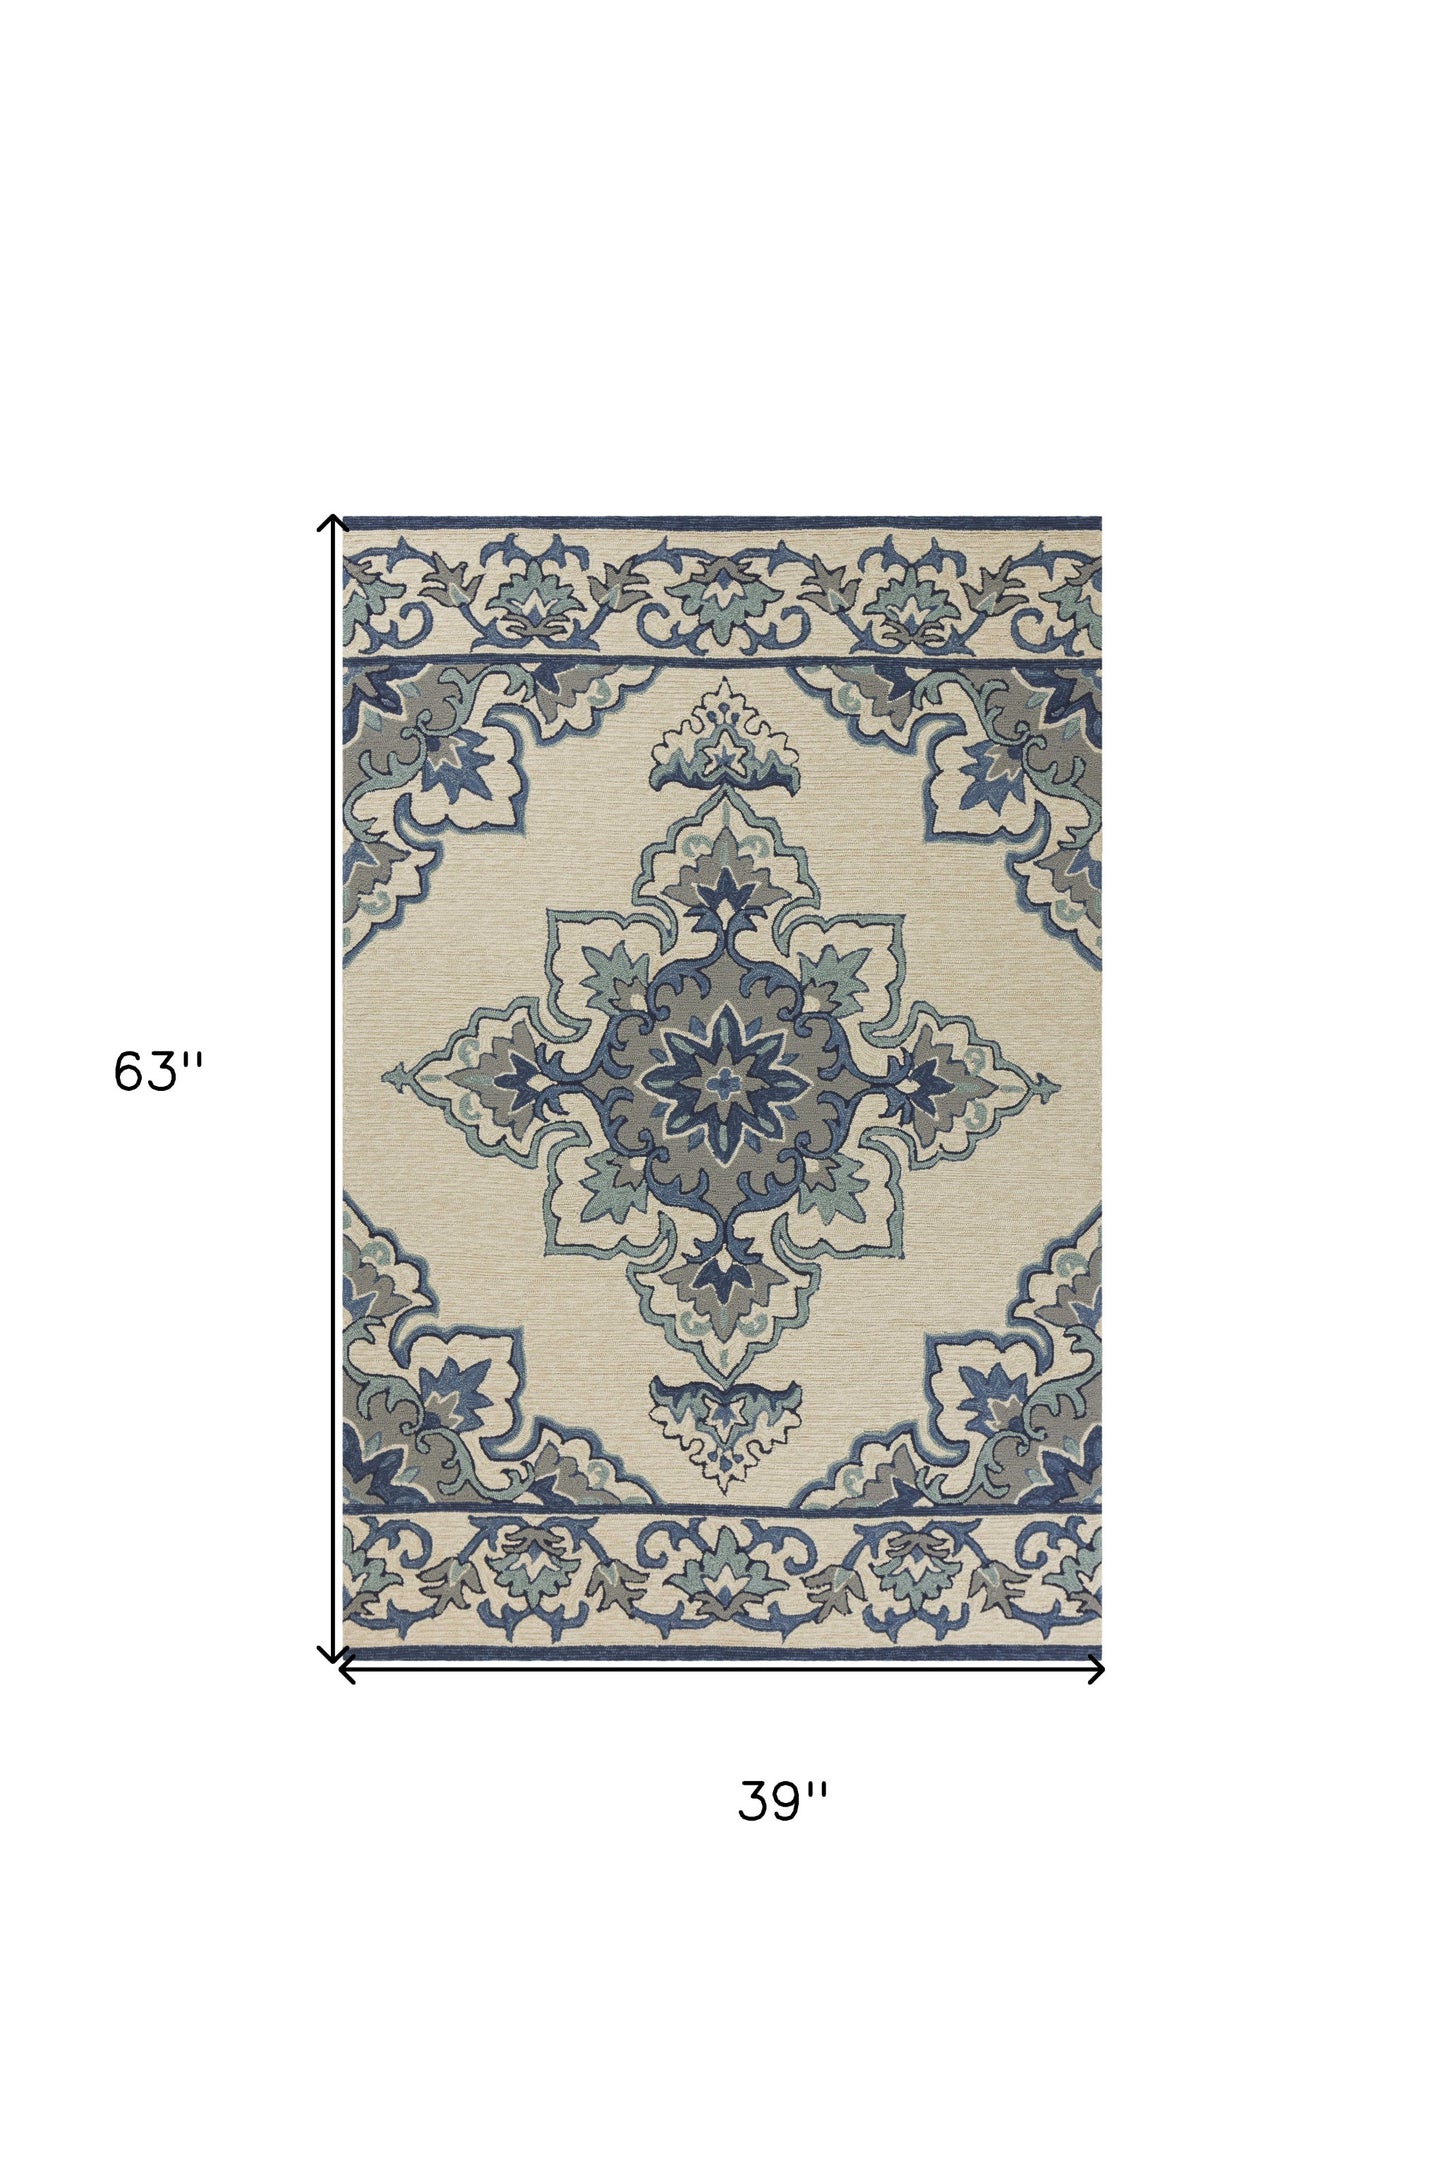 5' X 7' Ivory Or Blue Vines Bordered Uv Treated Indoor Outdoor Area Rug